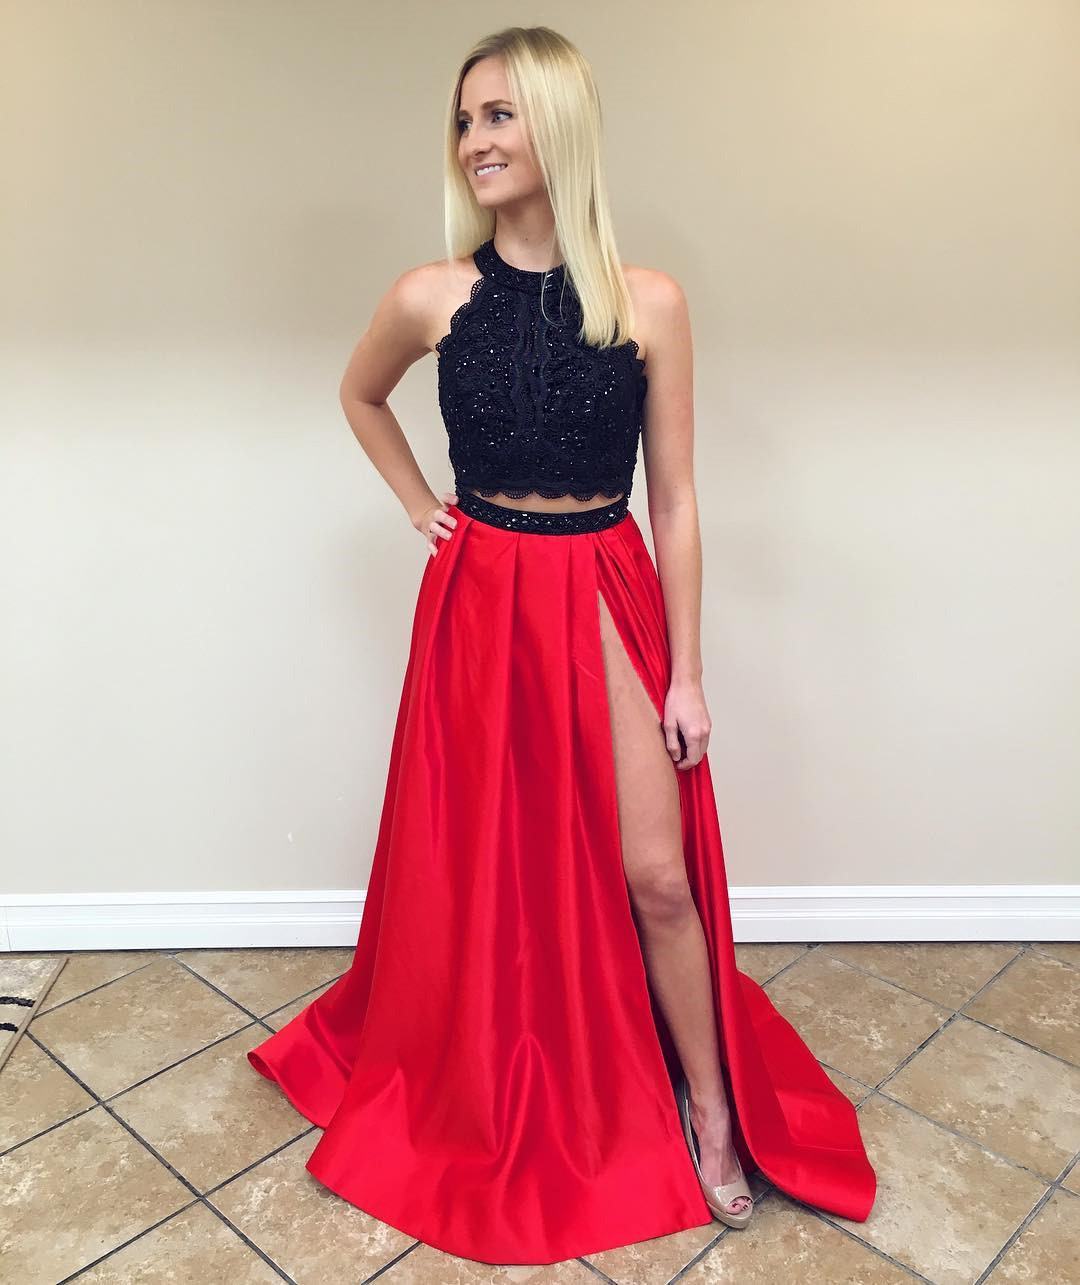 Black Lace Crop To Red Satin Two Piece Prom Dresses 2017 Sexy Split